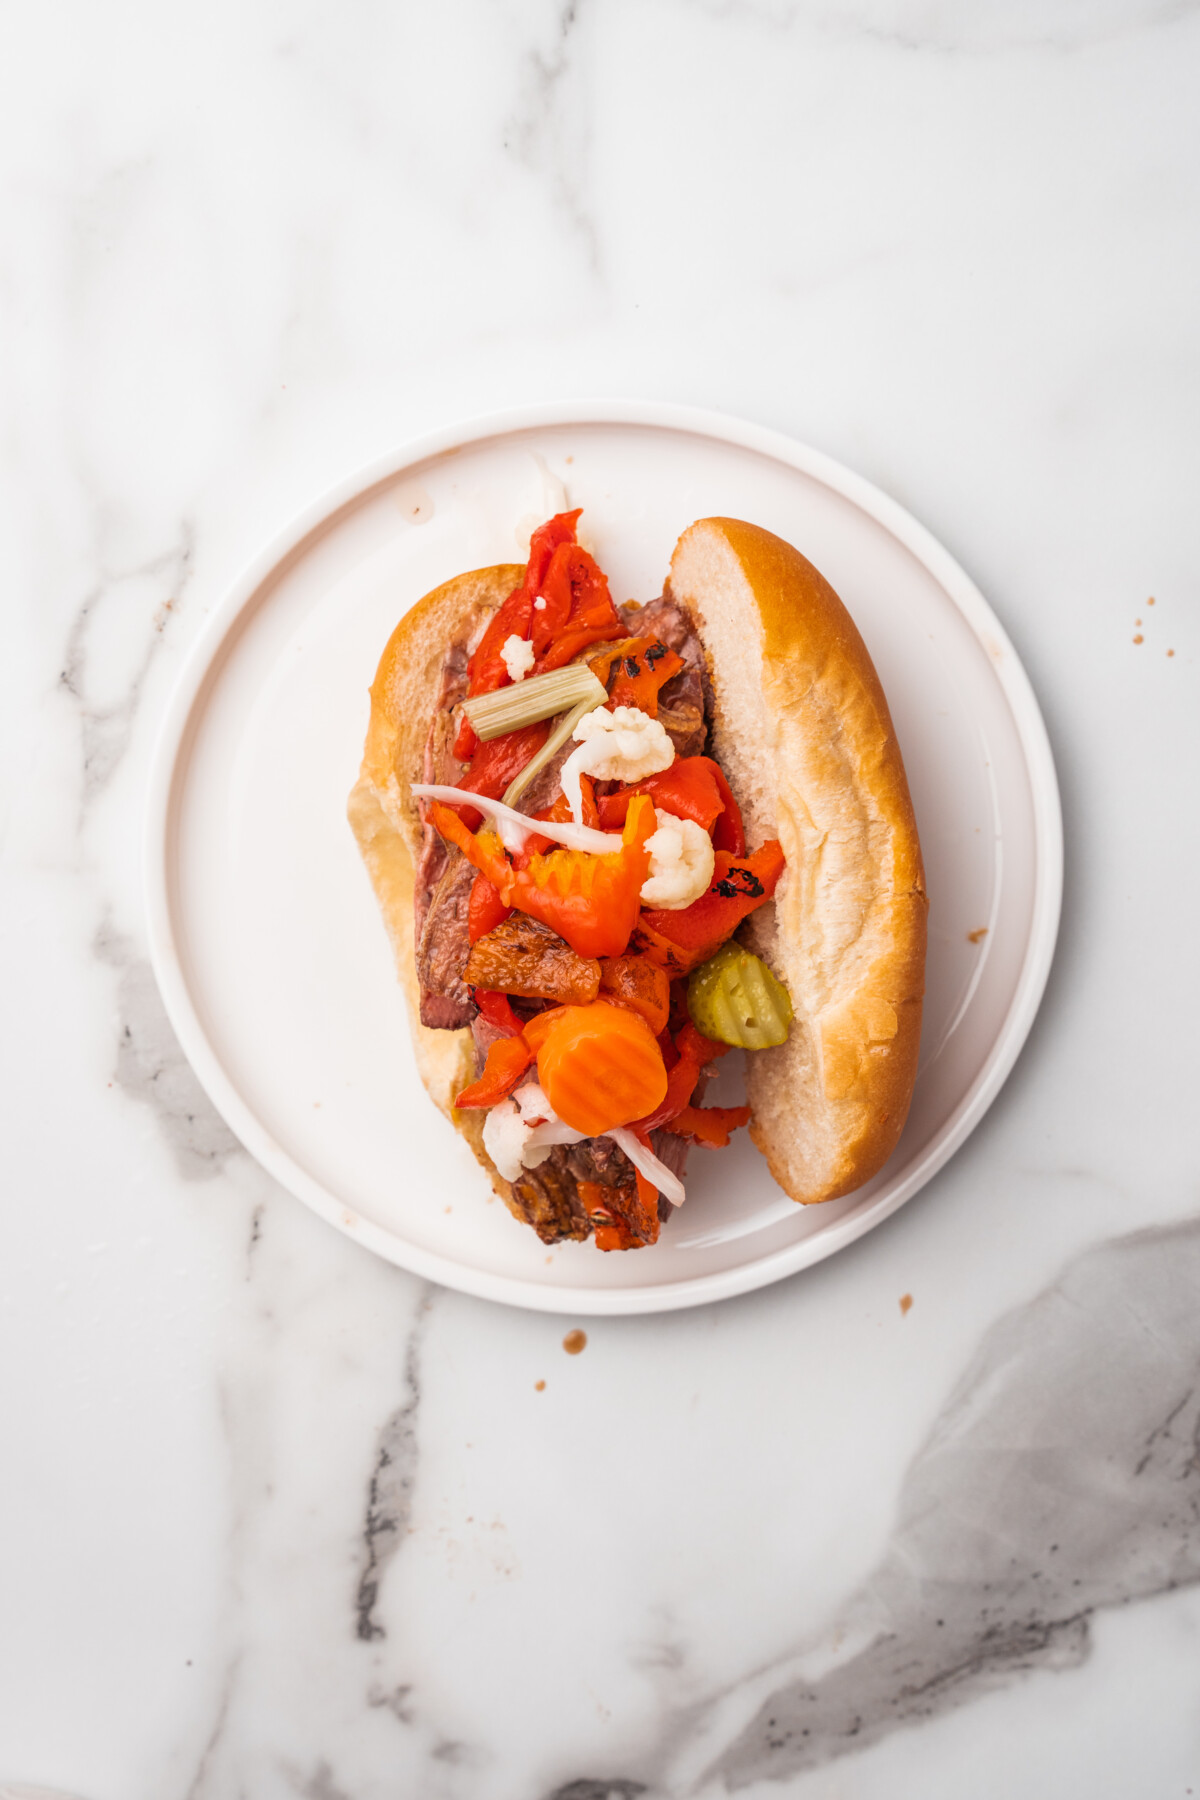 Pickled veggies on top of sliced Italian beef sandwiches.